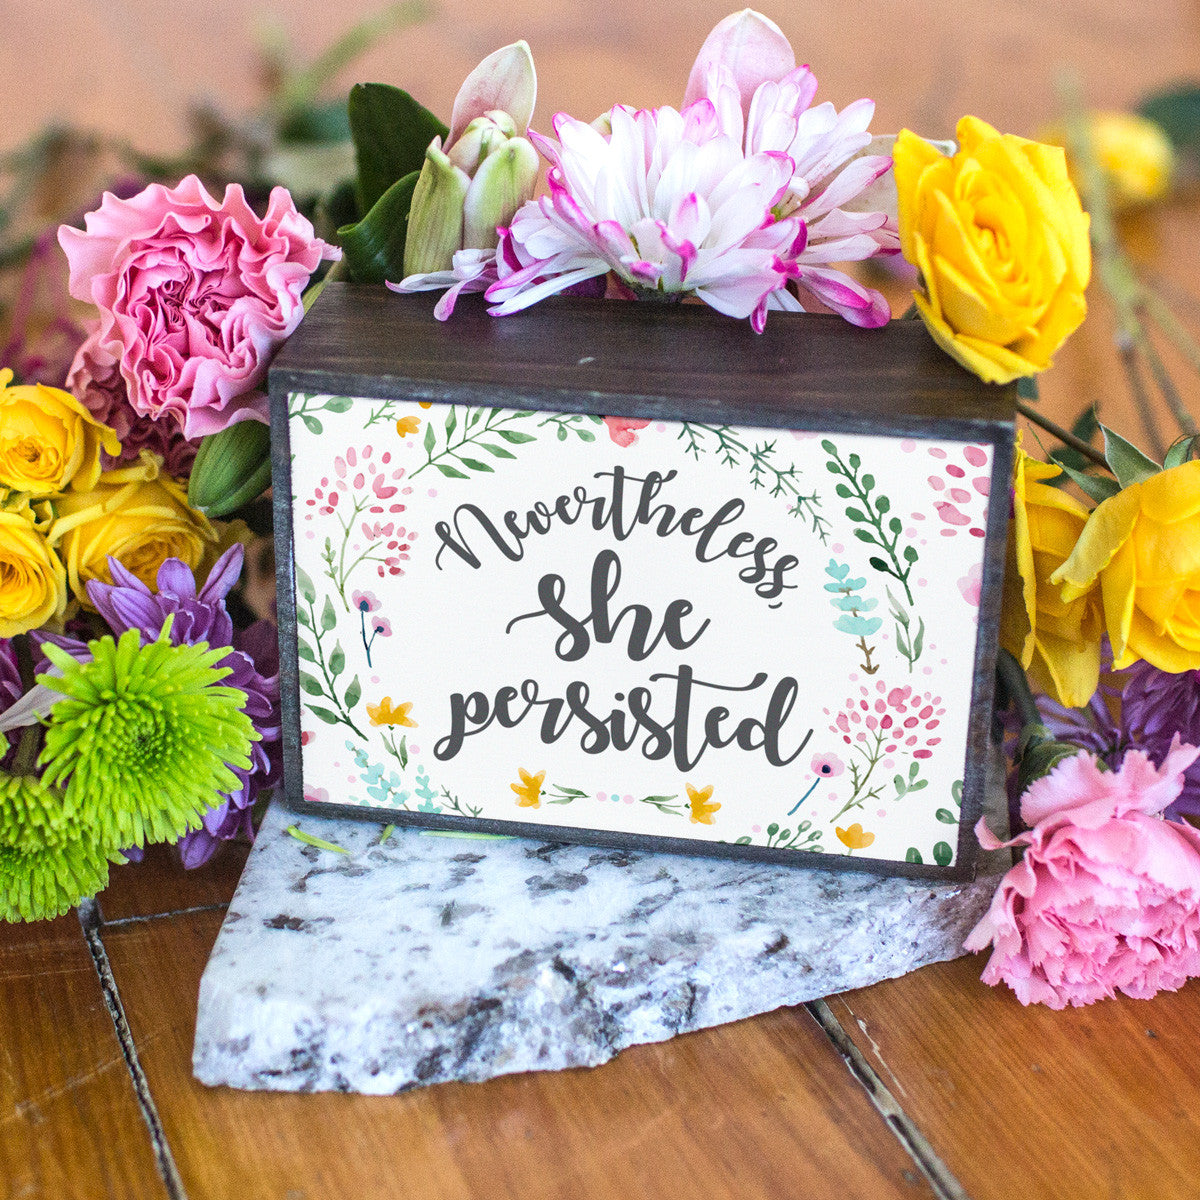 Nevertheless She Persisted Table Top Box - pipercleo.com